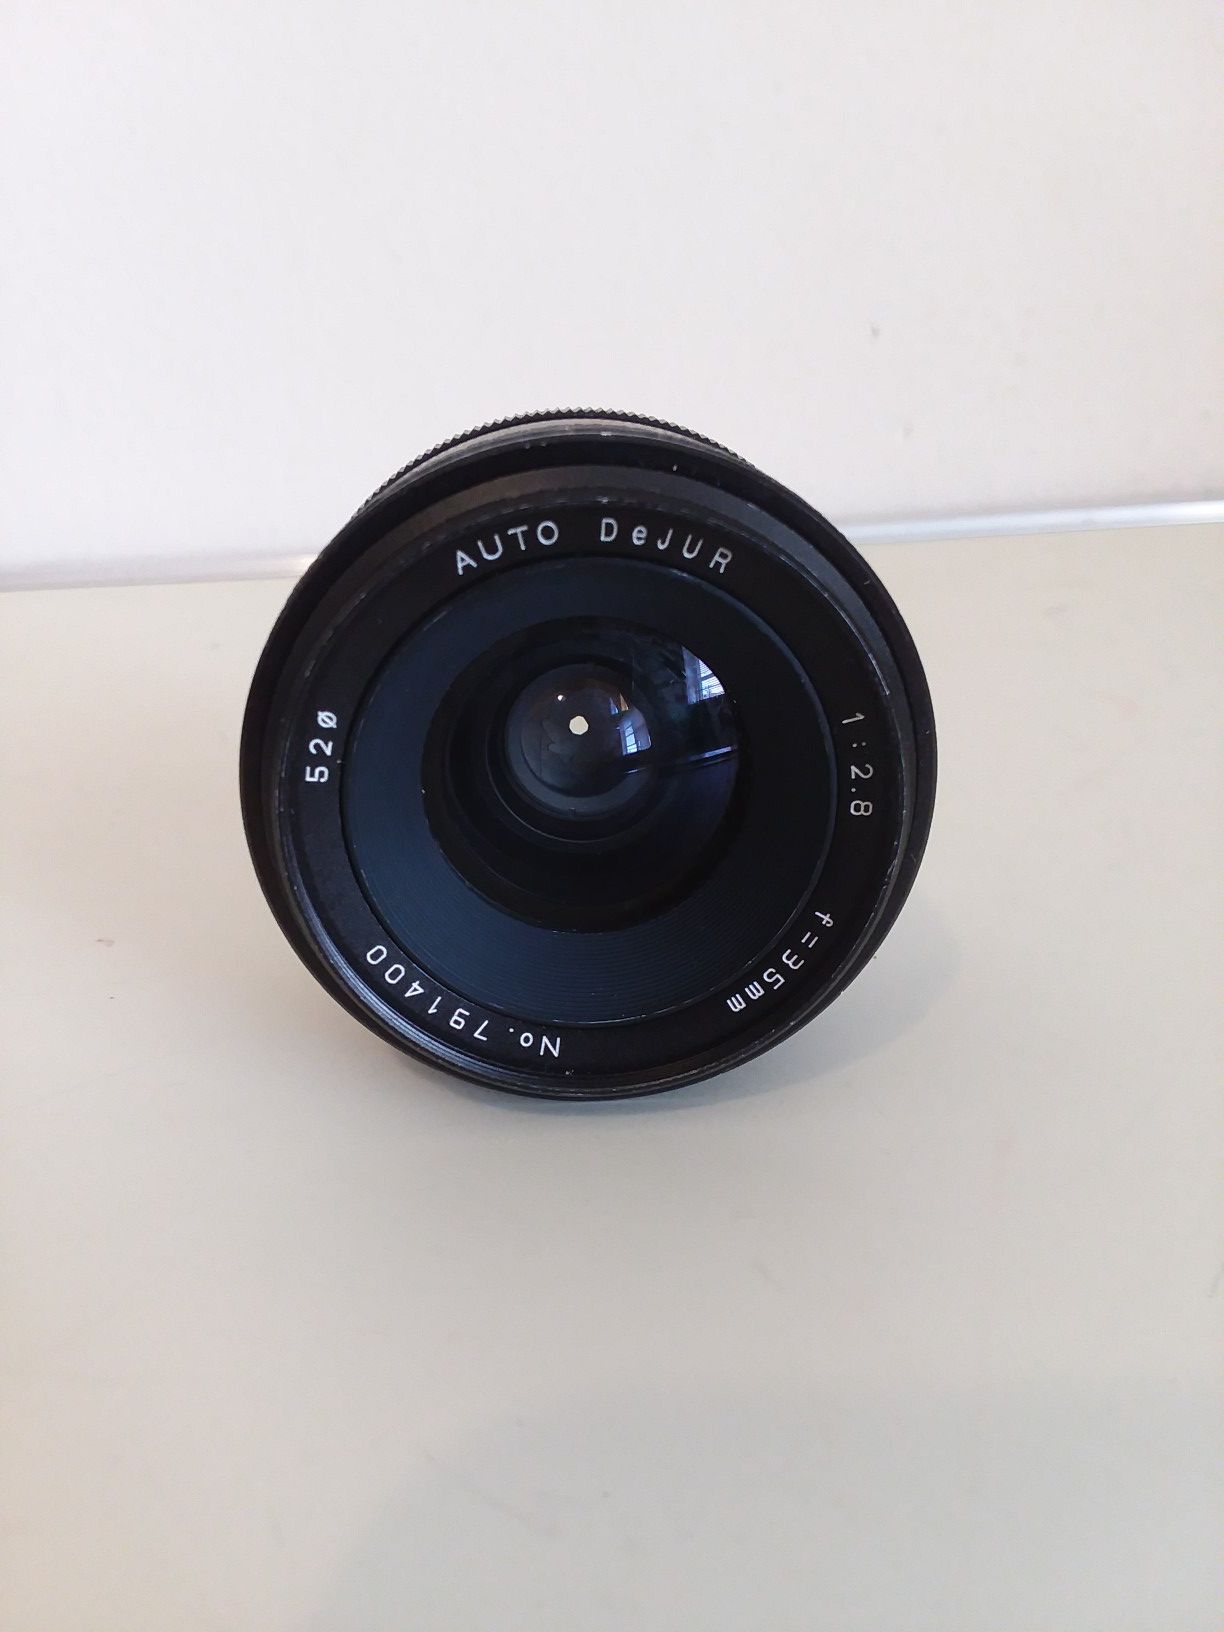 DeJur 28mm F/2.8 Canon FD Mount Wide Angle Lens For DSLR M4/3 Camera.